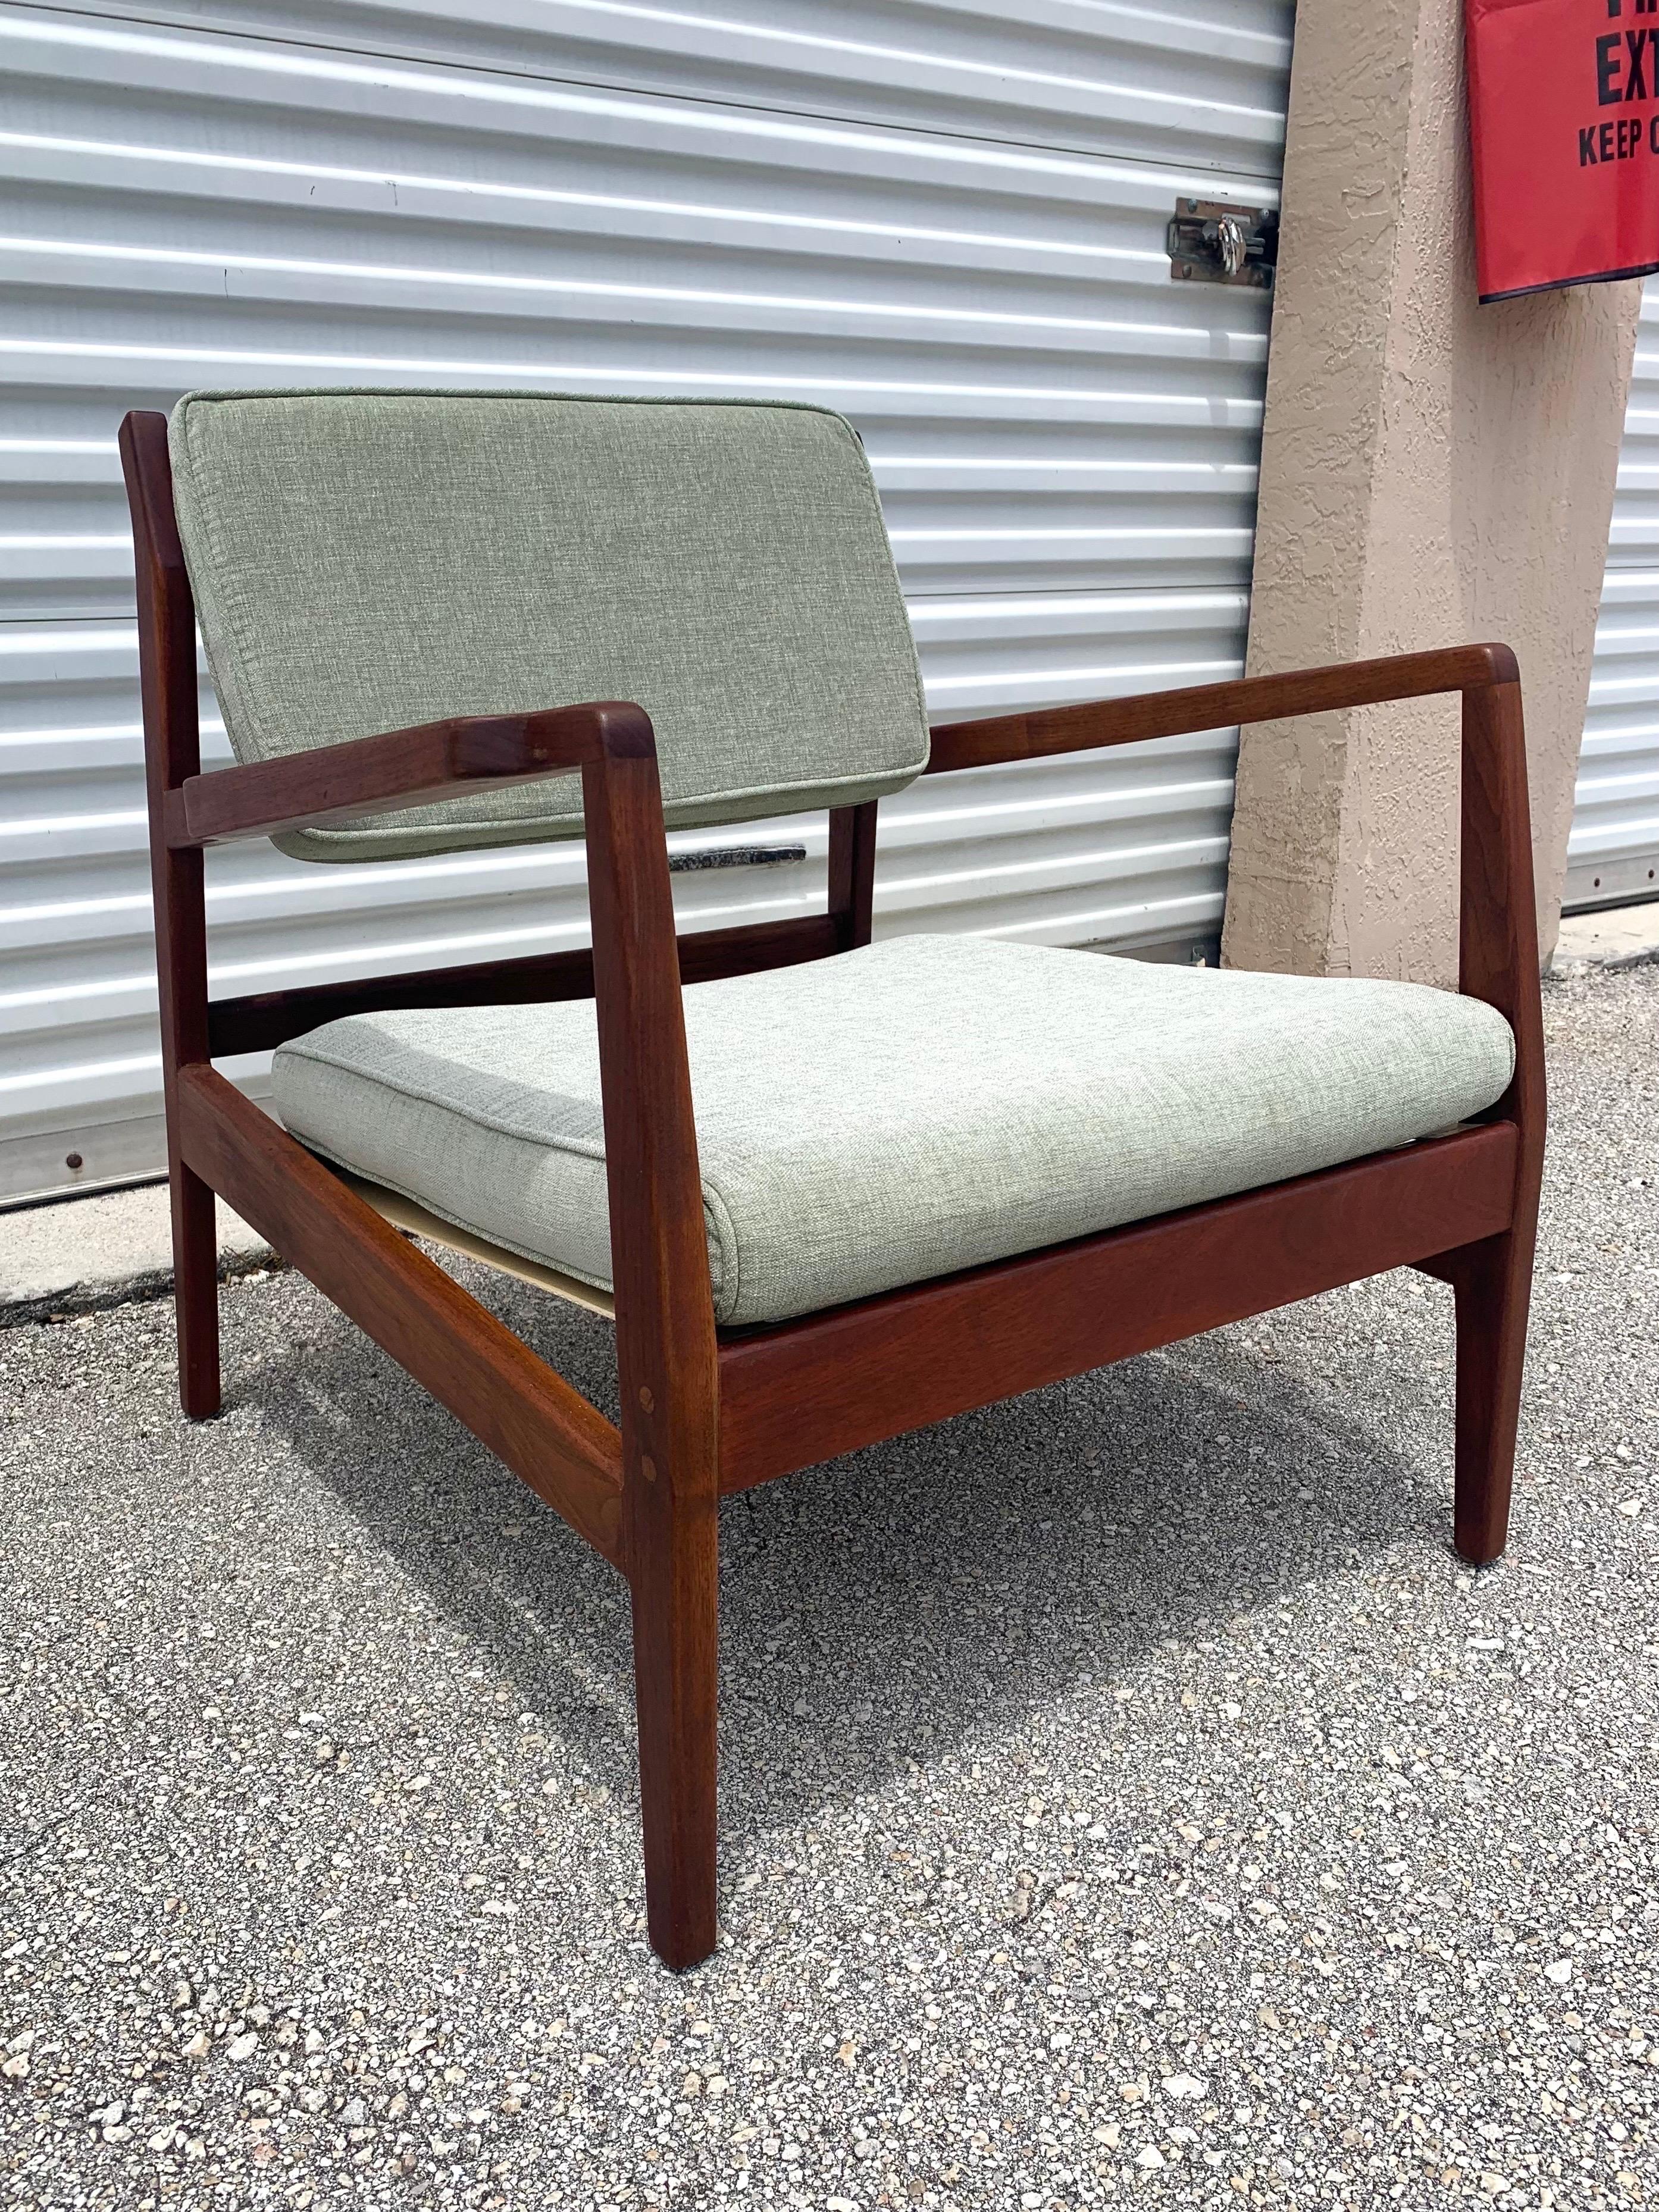 Jens Risom U 460 lounge chair. Solid, fully restored, walnut frame and new upholstery and strapping. This chair is ready to last another 60 years. Very comfortable and make a great accent chair for you and your guests. Upholstery is a sage green